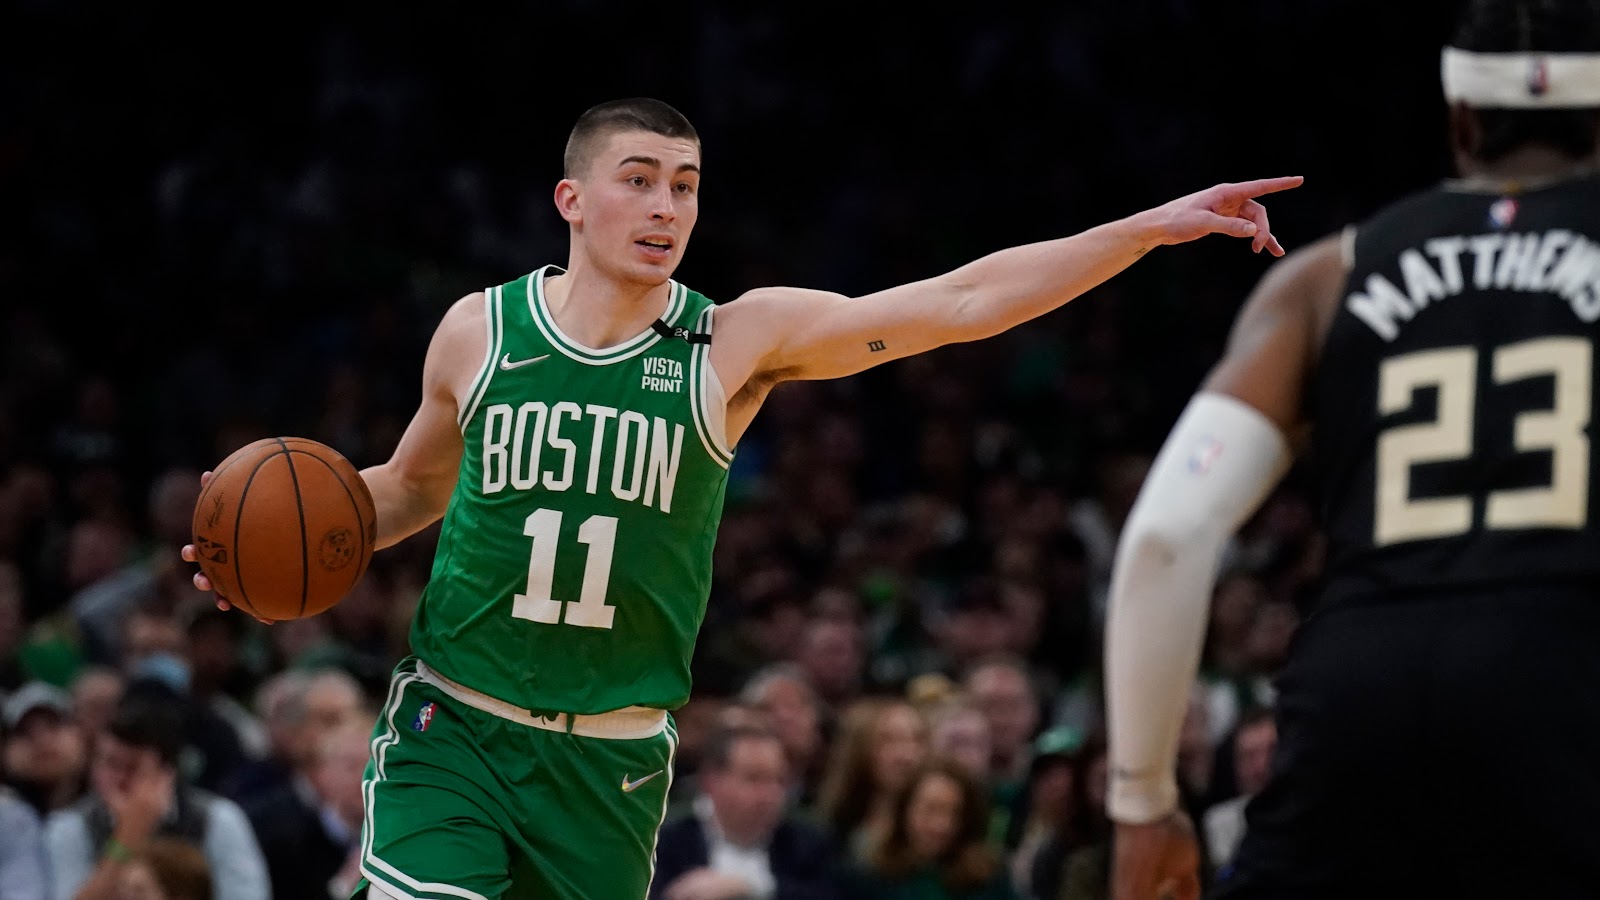 Payton Pritchard shows Celtics why he should be off trade market